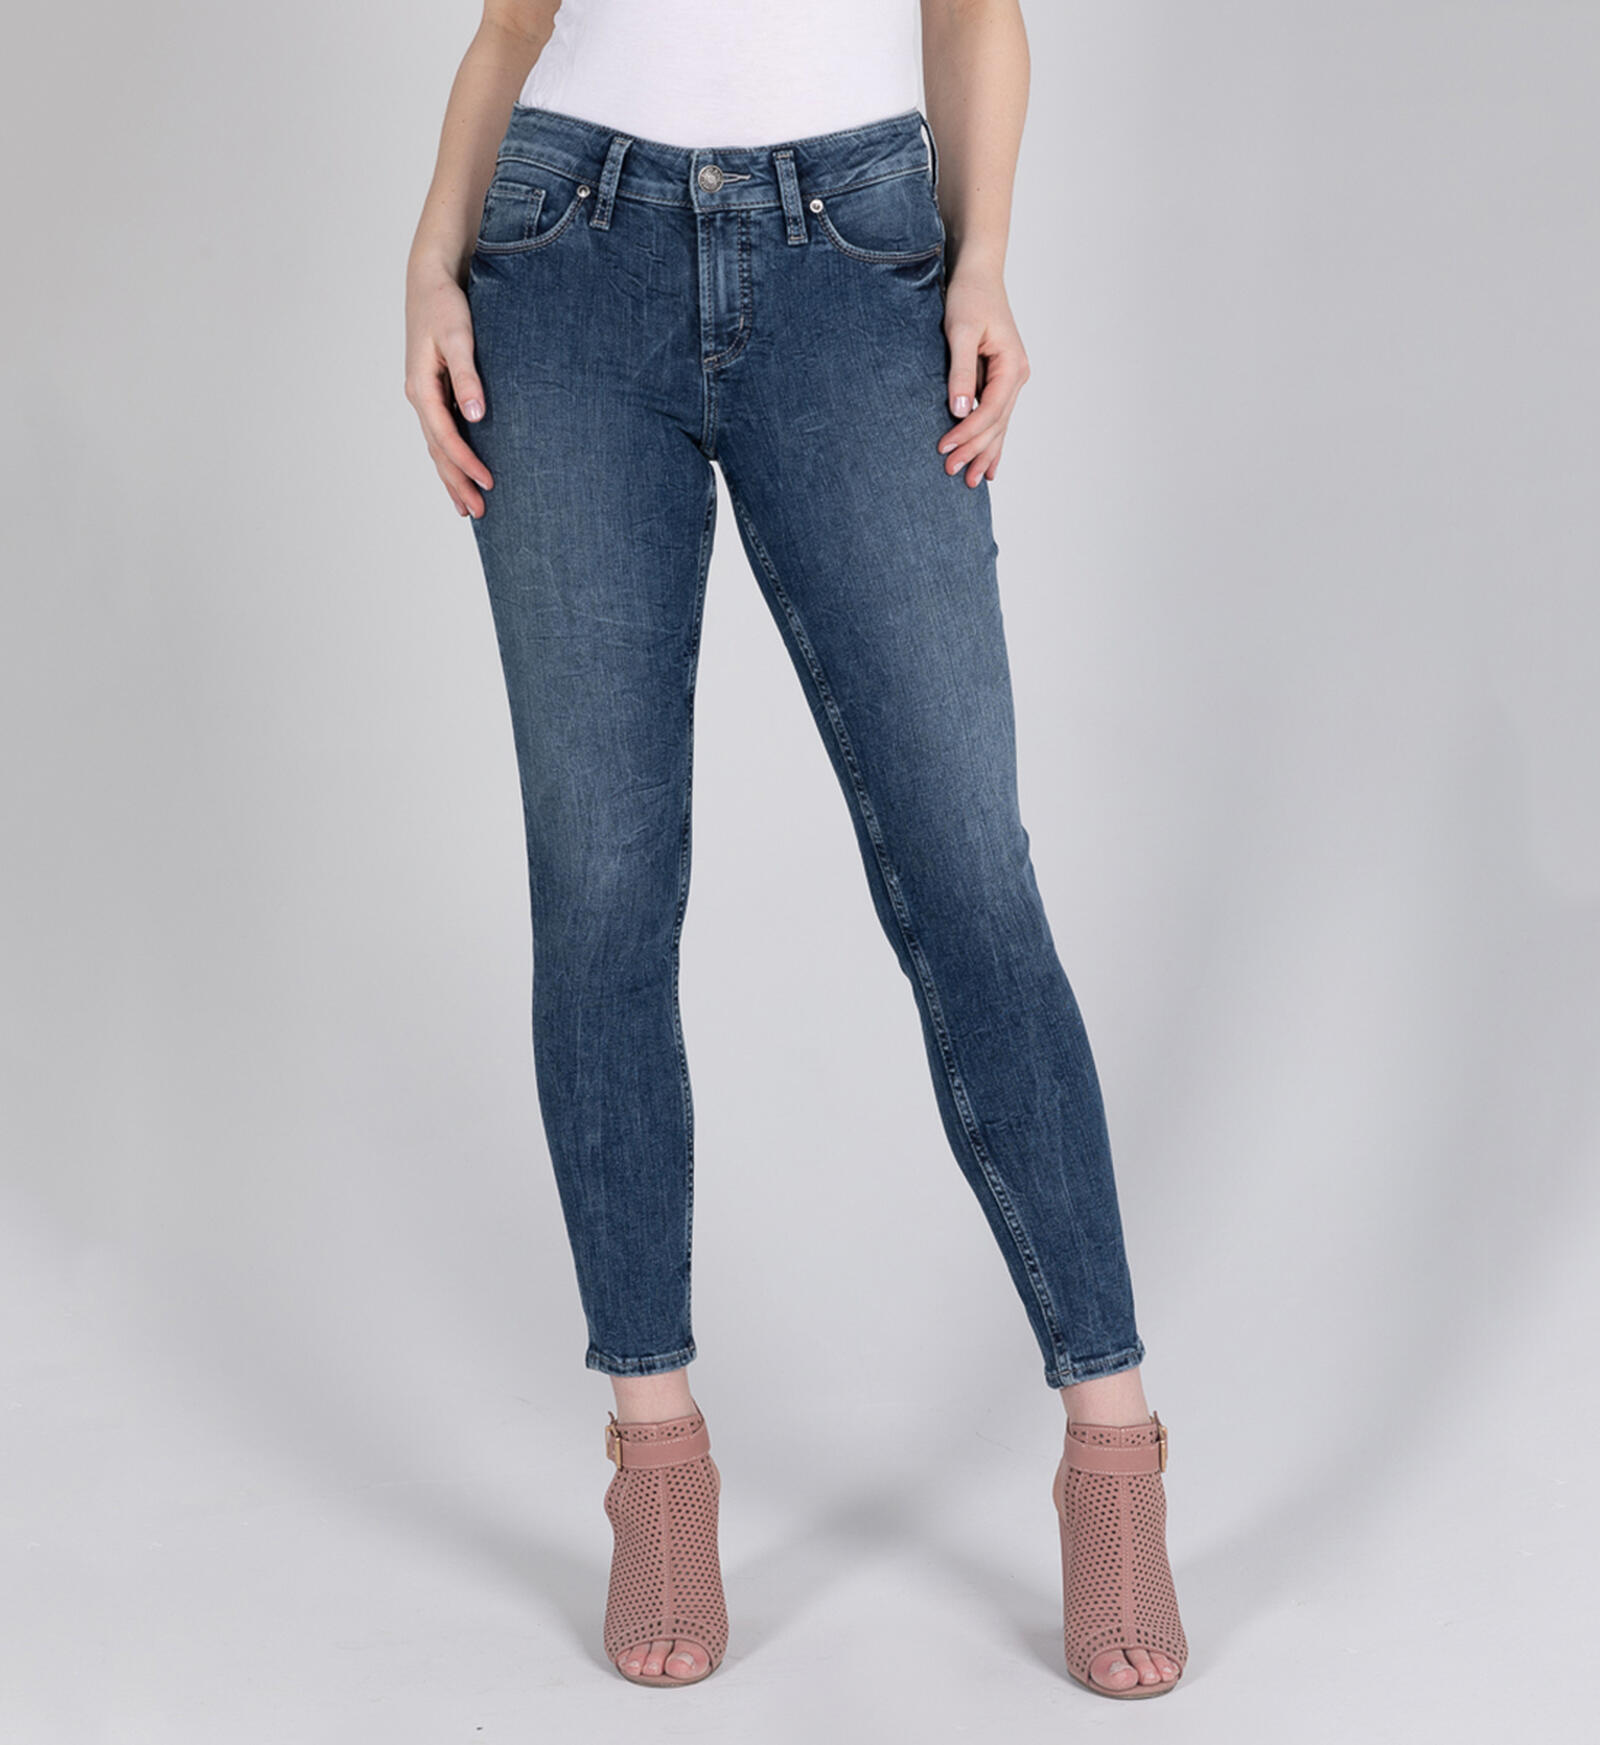 Buy Elyse Mid Rise Skinny Jeans for USD 79.00 | Silver Jeans US New